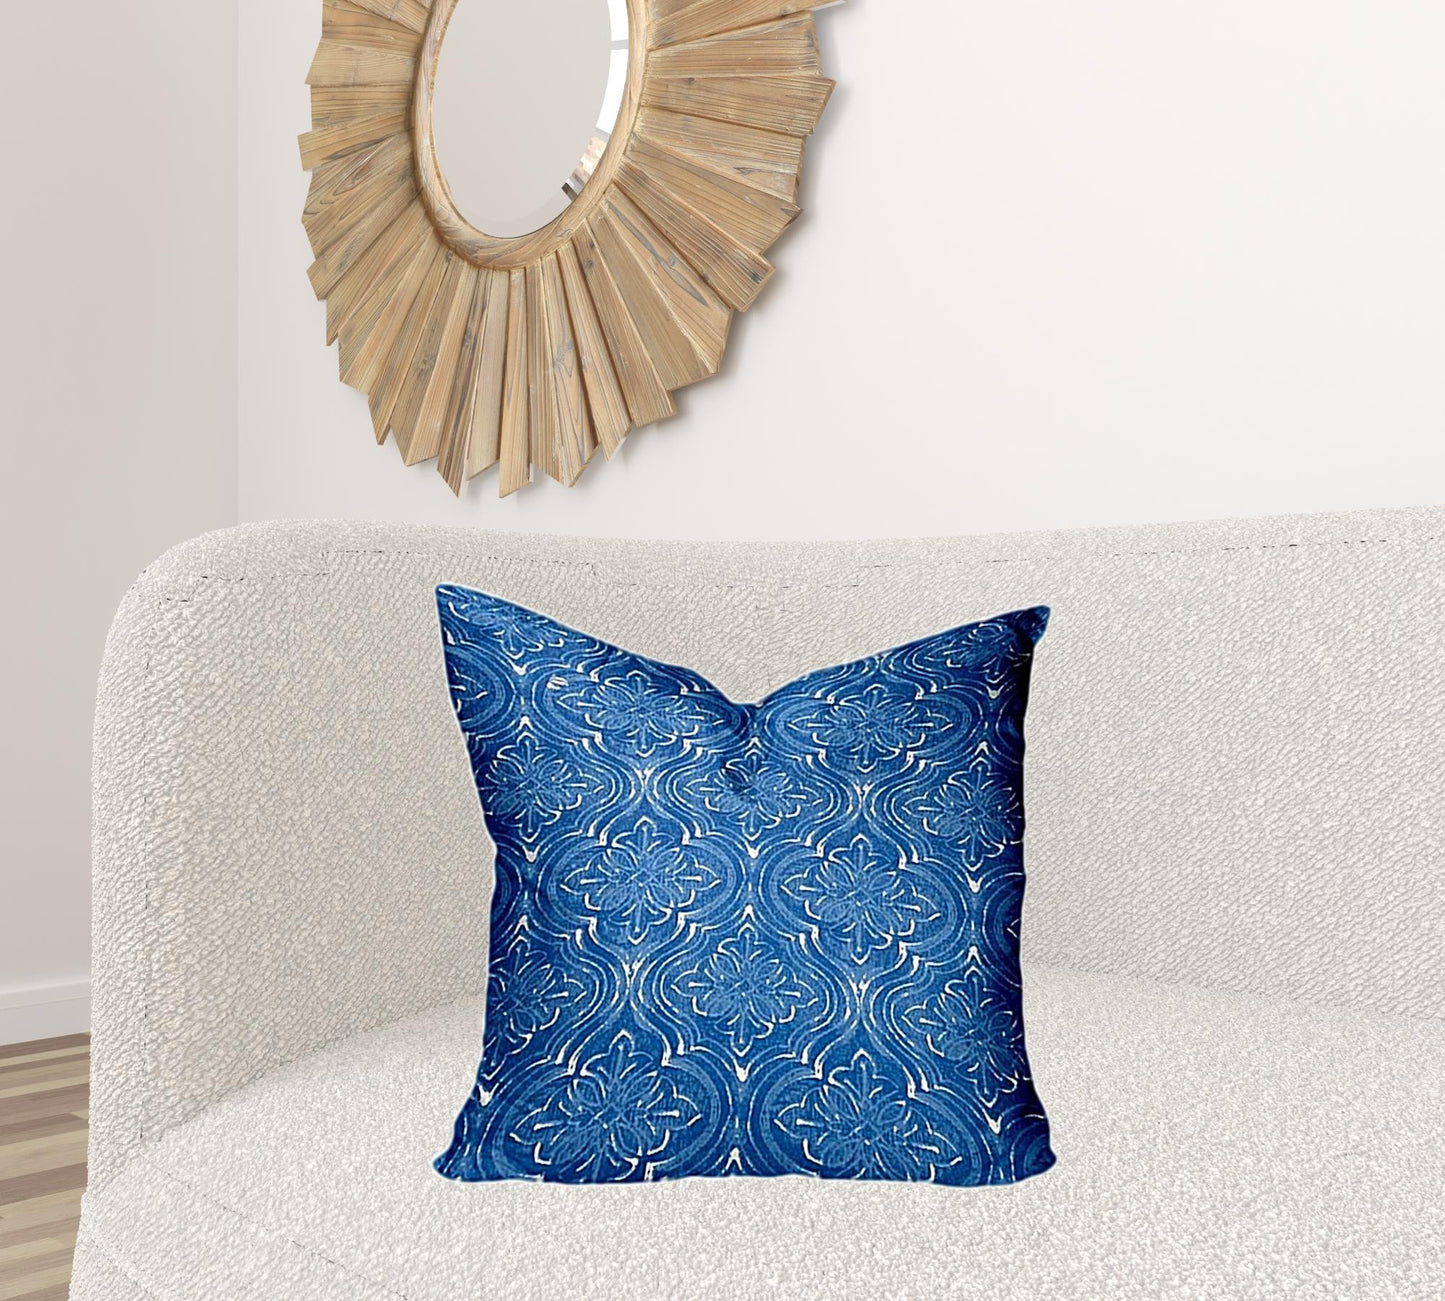 22" X 22" Blue And White Enveloped Ikat Throw Indoor Outdoor Pillow